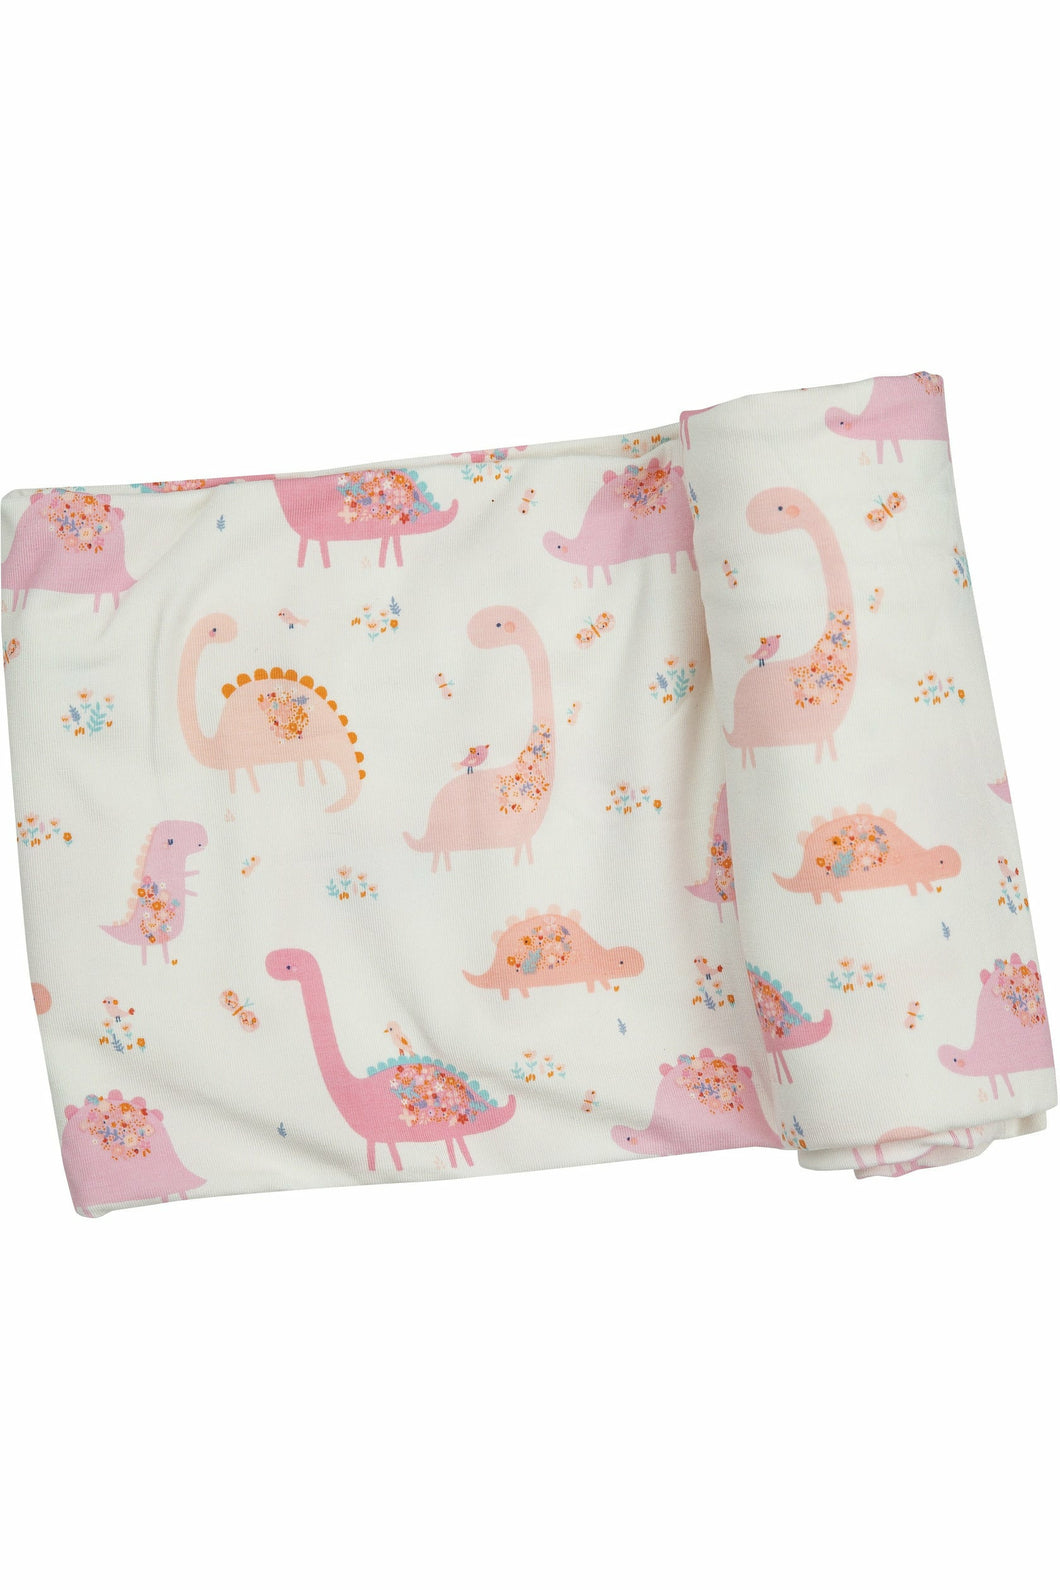 FLORAL DINOS SWADDLE